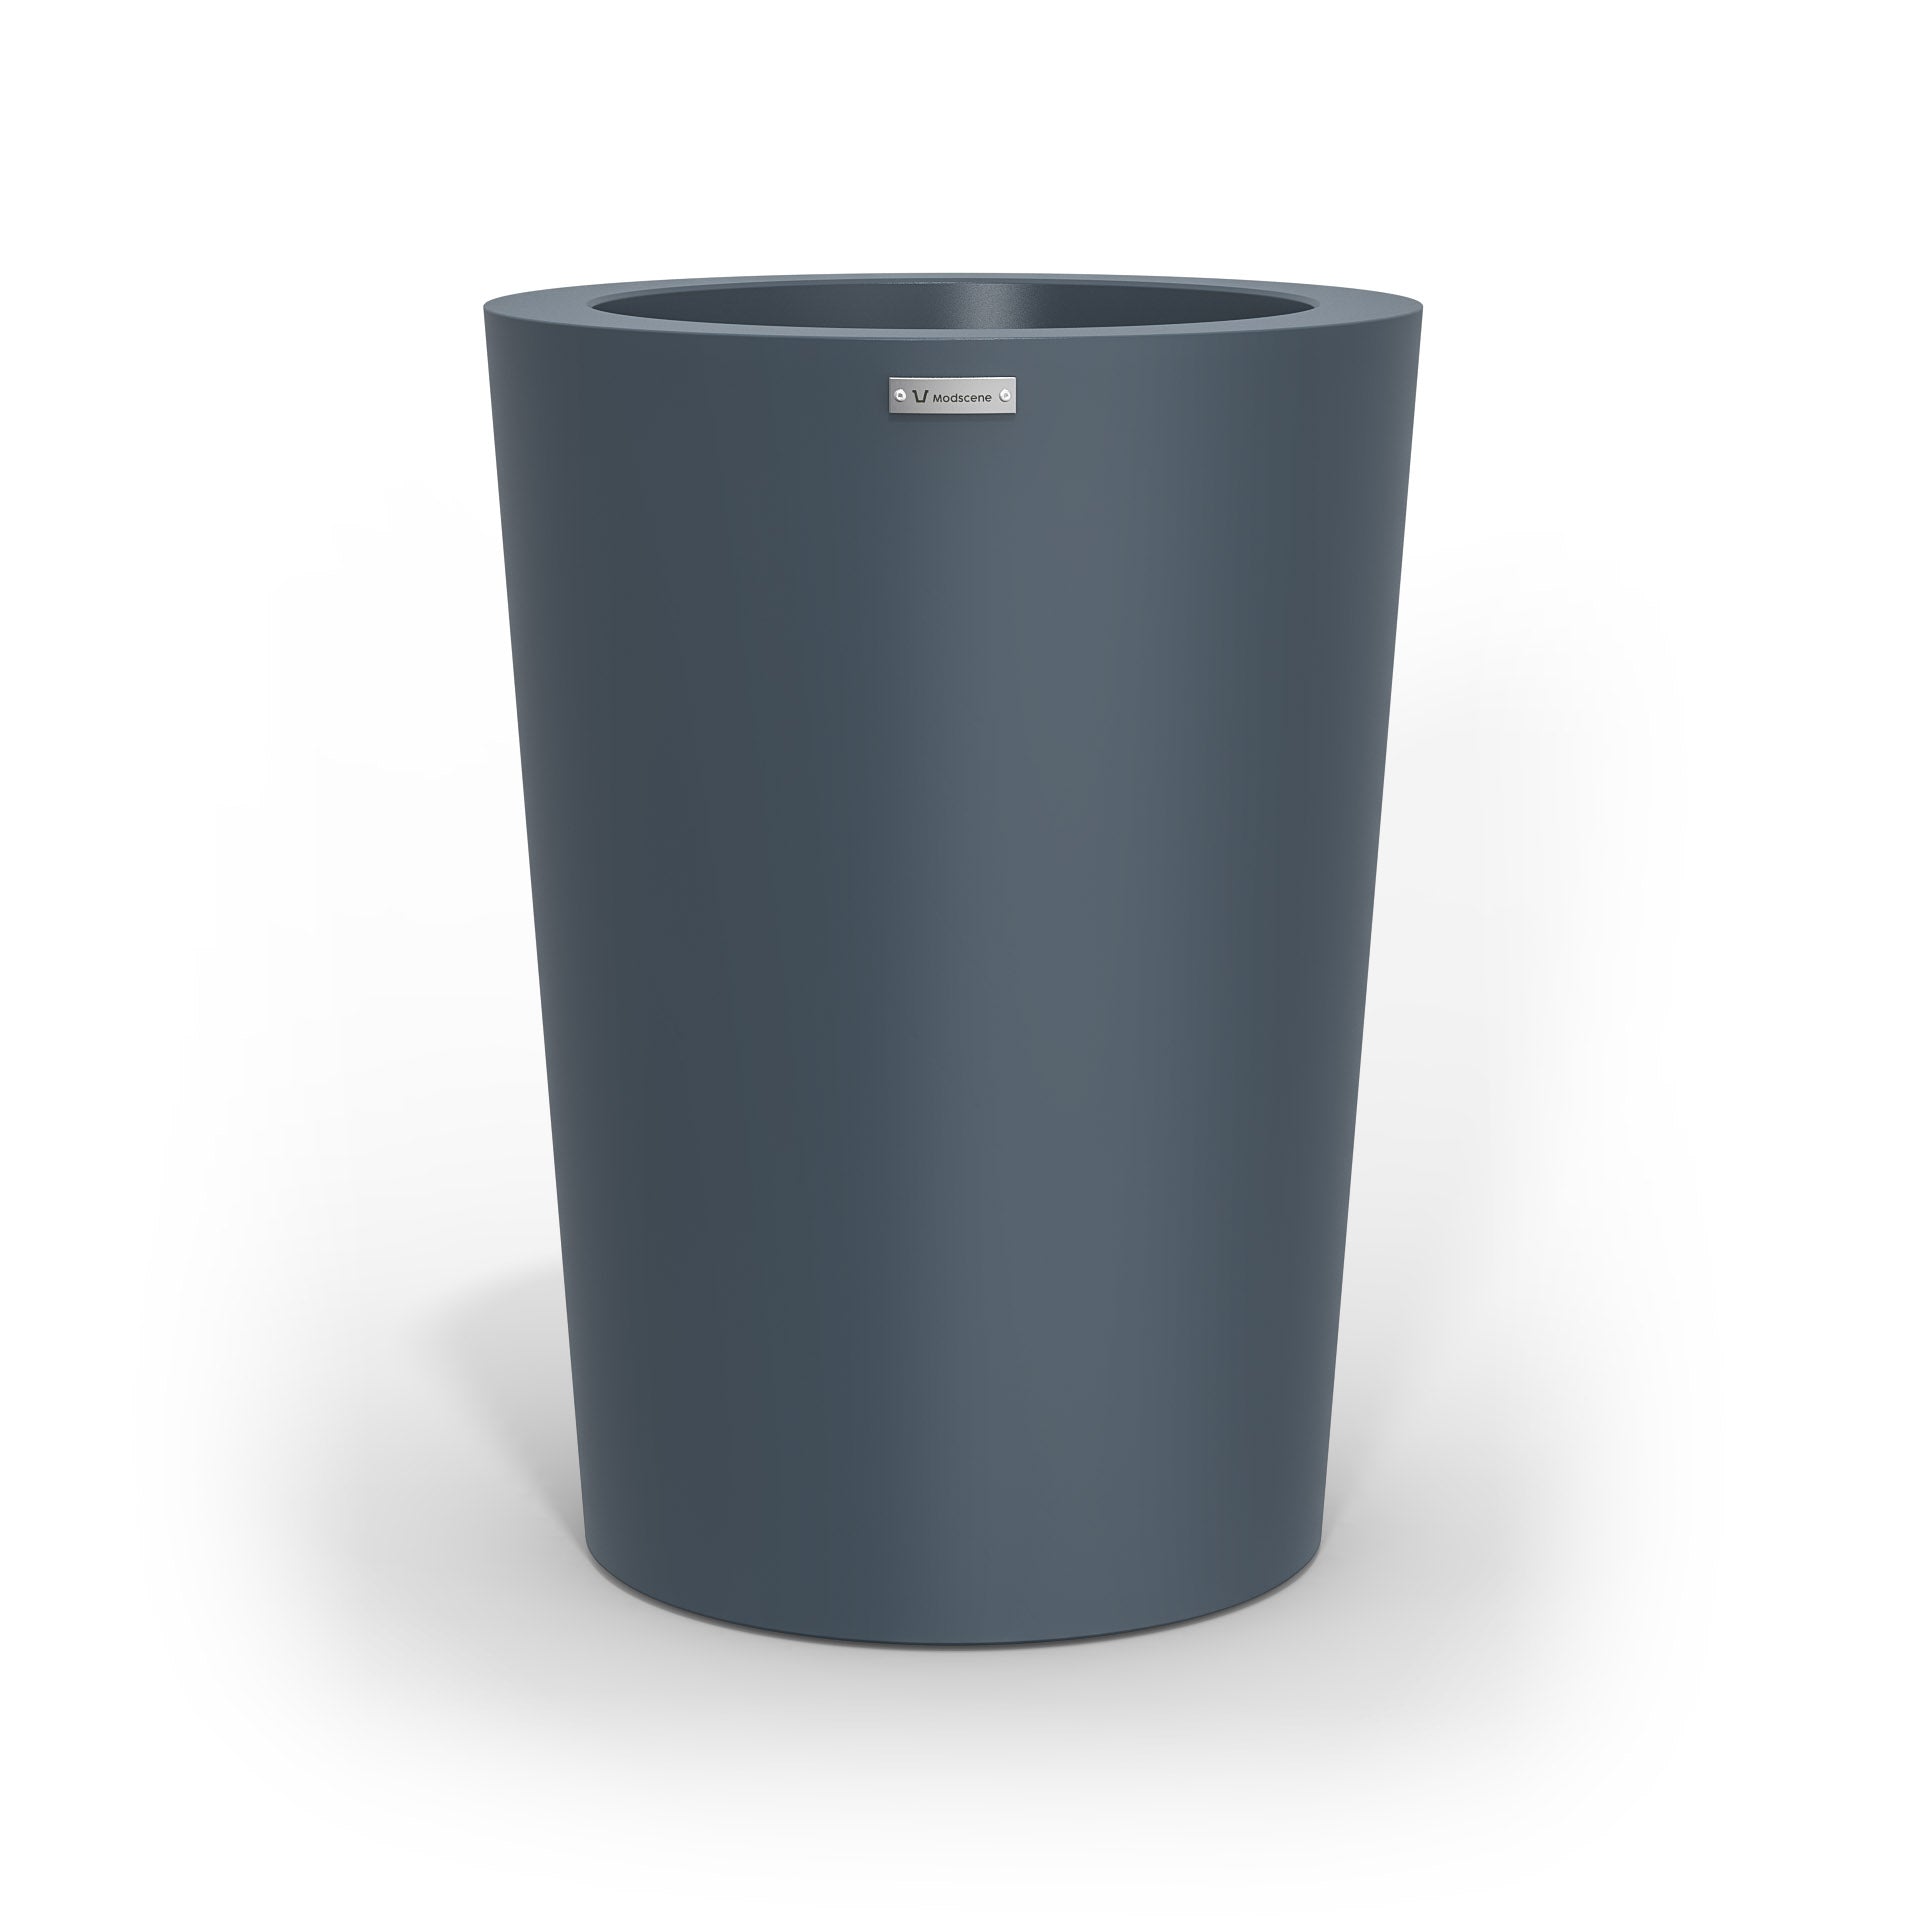 A modern style planter pot in a storm blue colour. Made by Modscene NZ.